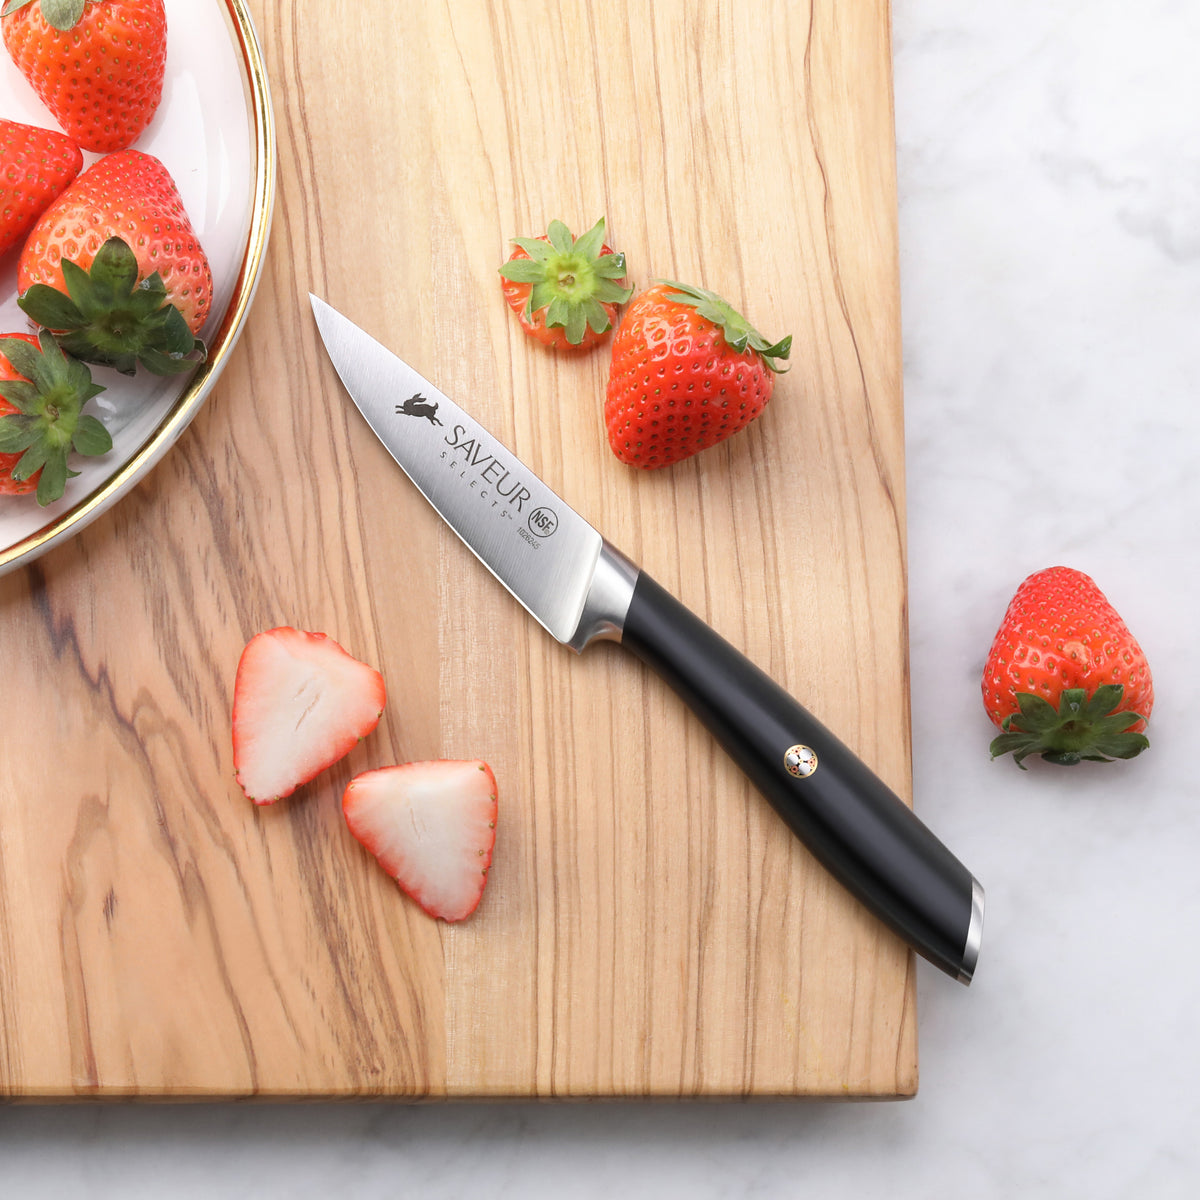 5 Inch Paring Knife - Small Kitchen Knife for Cutting Fruit